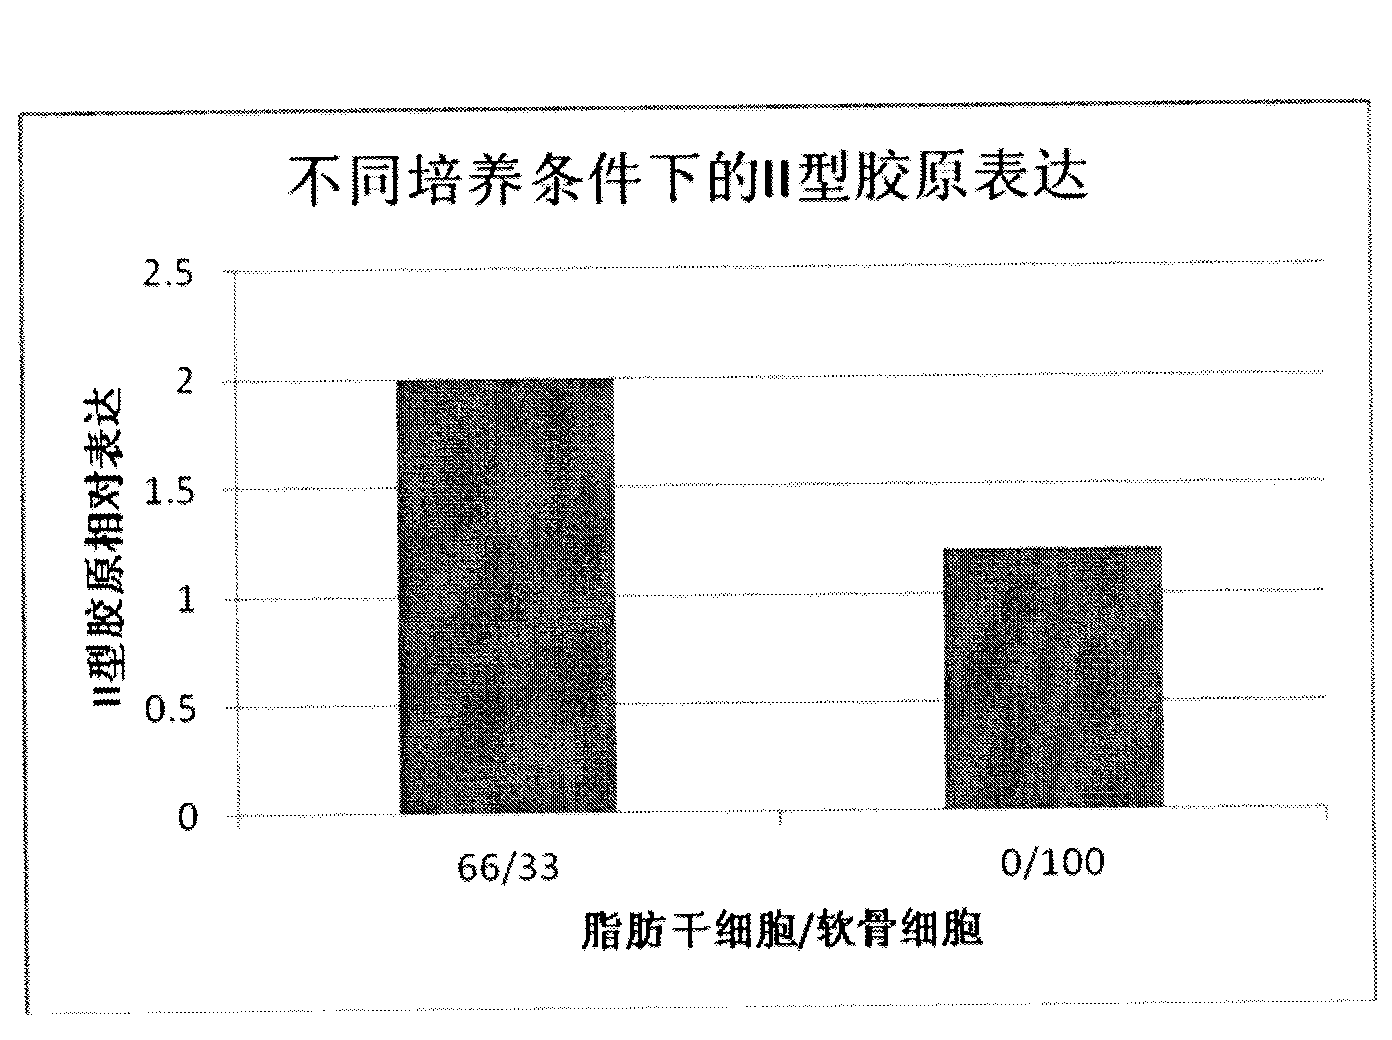 Cartilage graft for cartilage injury repair and preparation method thereof